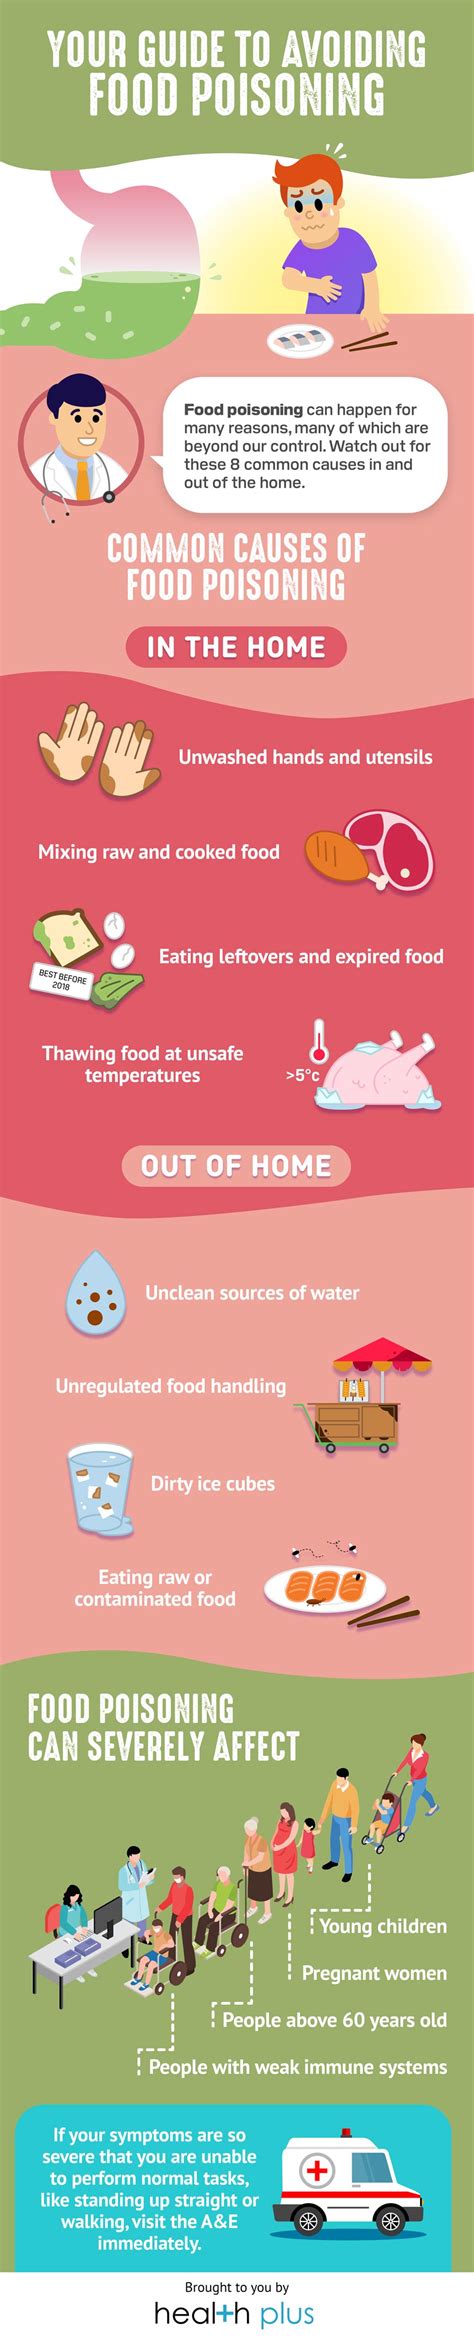 Most cases of food poisoning resolve on their own, however, approximately 3,000 people in the u.s. 8 Common Causes of Food Poisoning | Health Plus